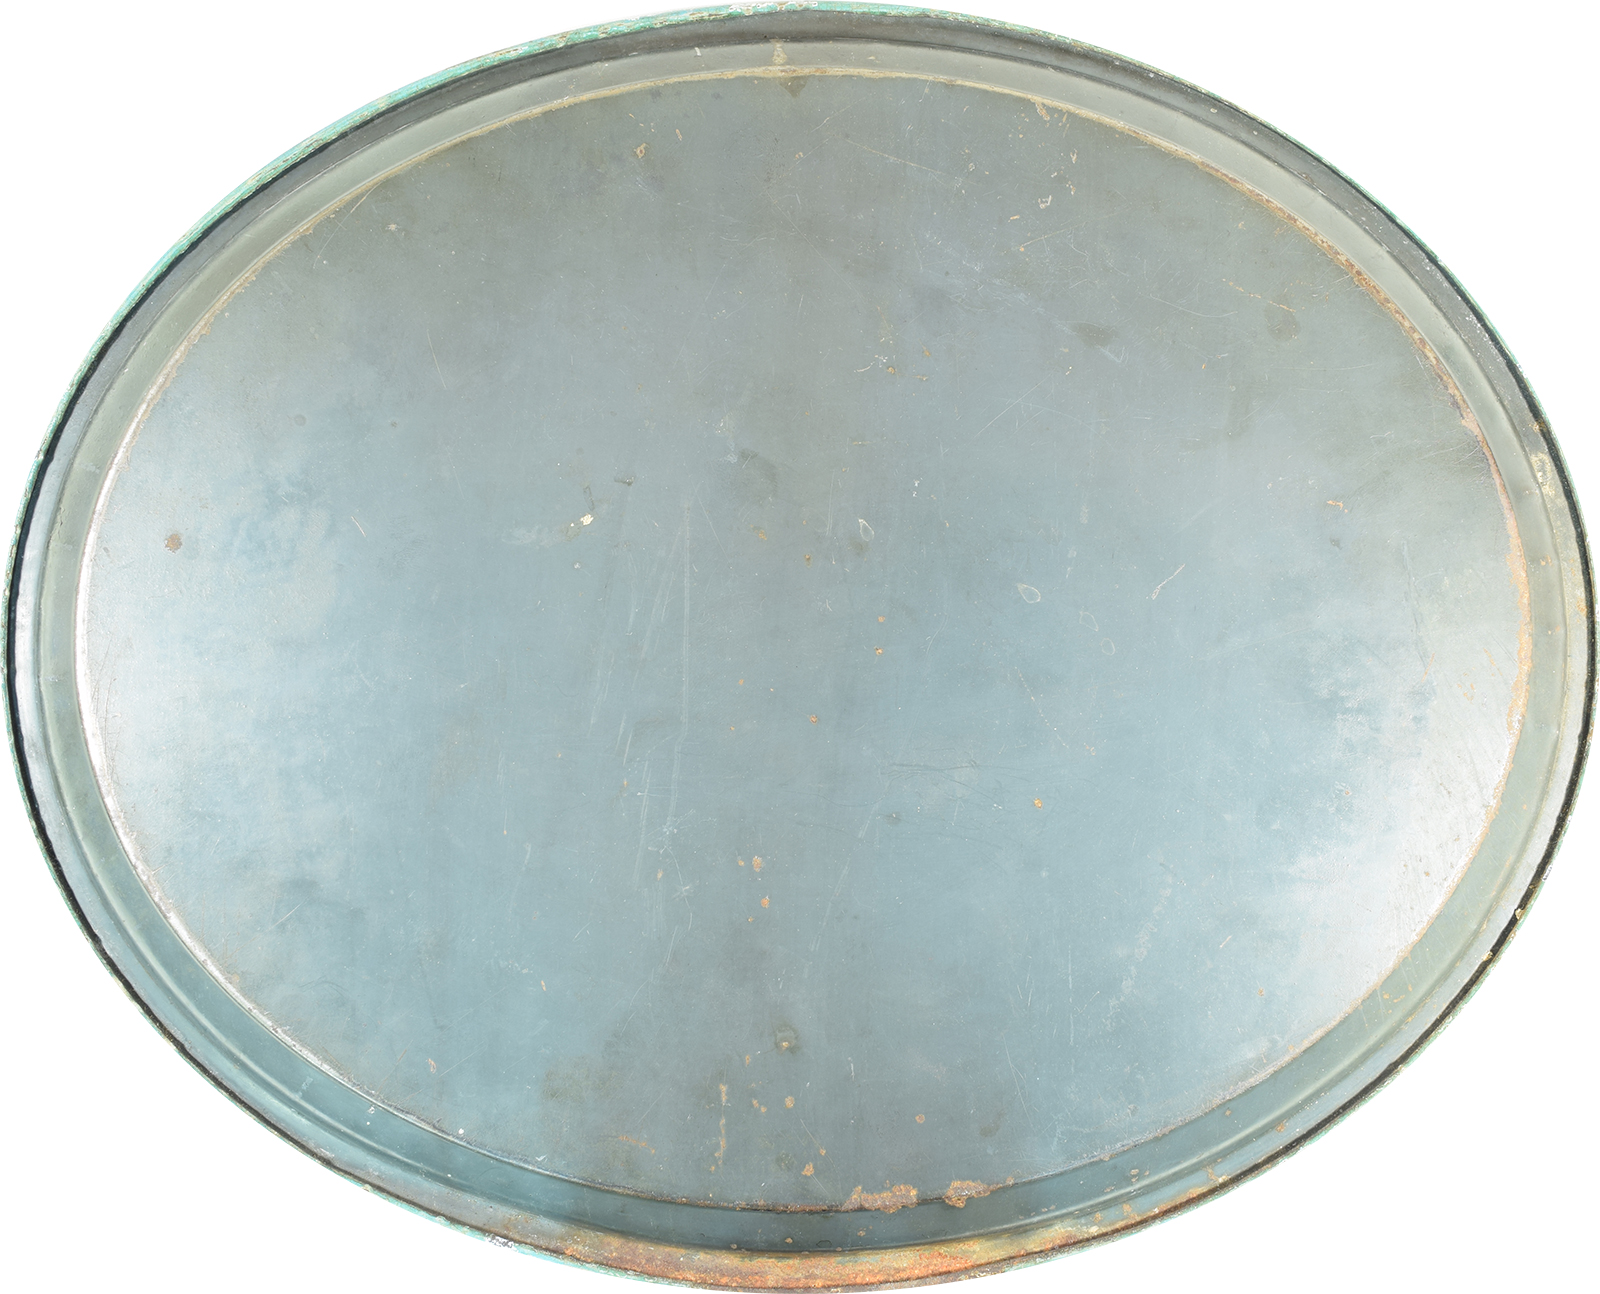 Other Collectibles 1900 SCARCE 16″ OVAL MCKINLEY-ROOSEVELT JUGATE CAMPAIGN TIN TRAY VG+/EXC